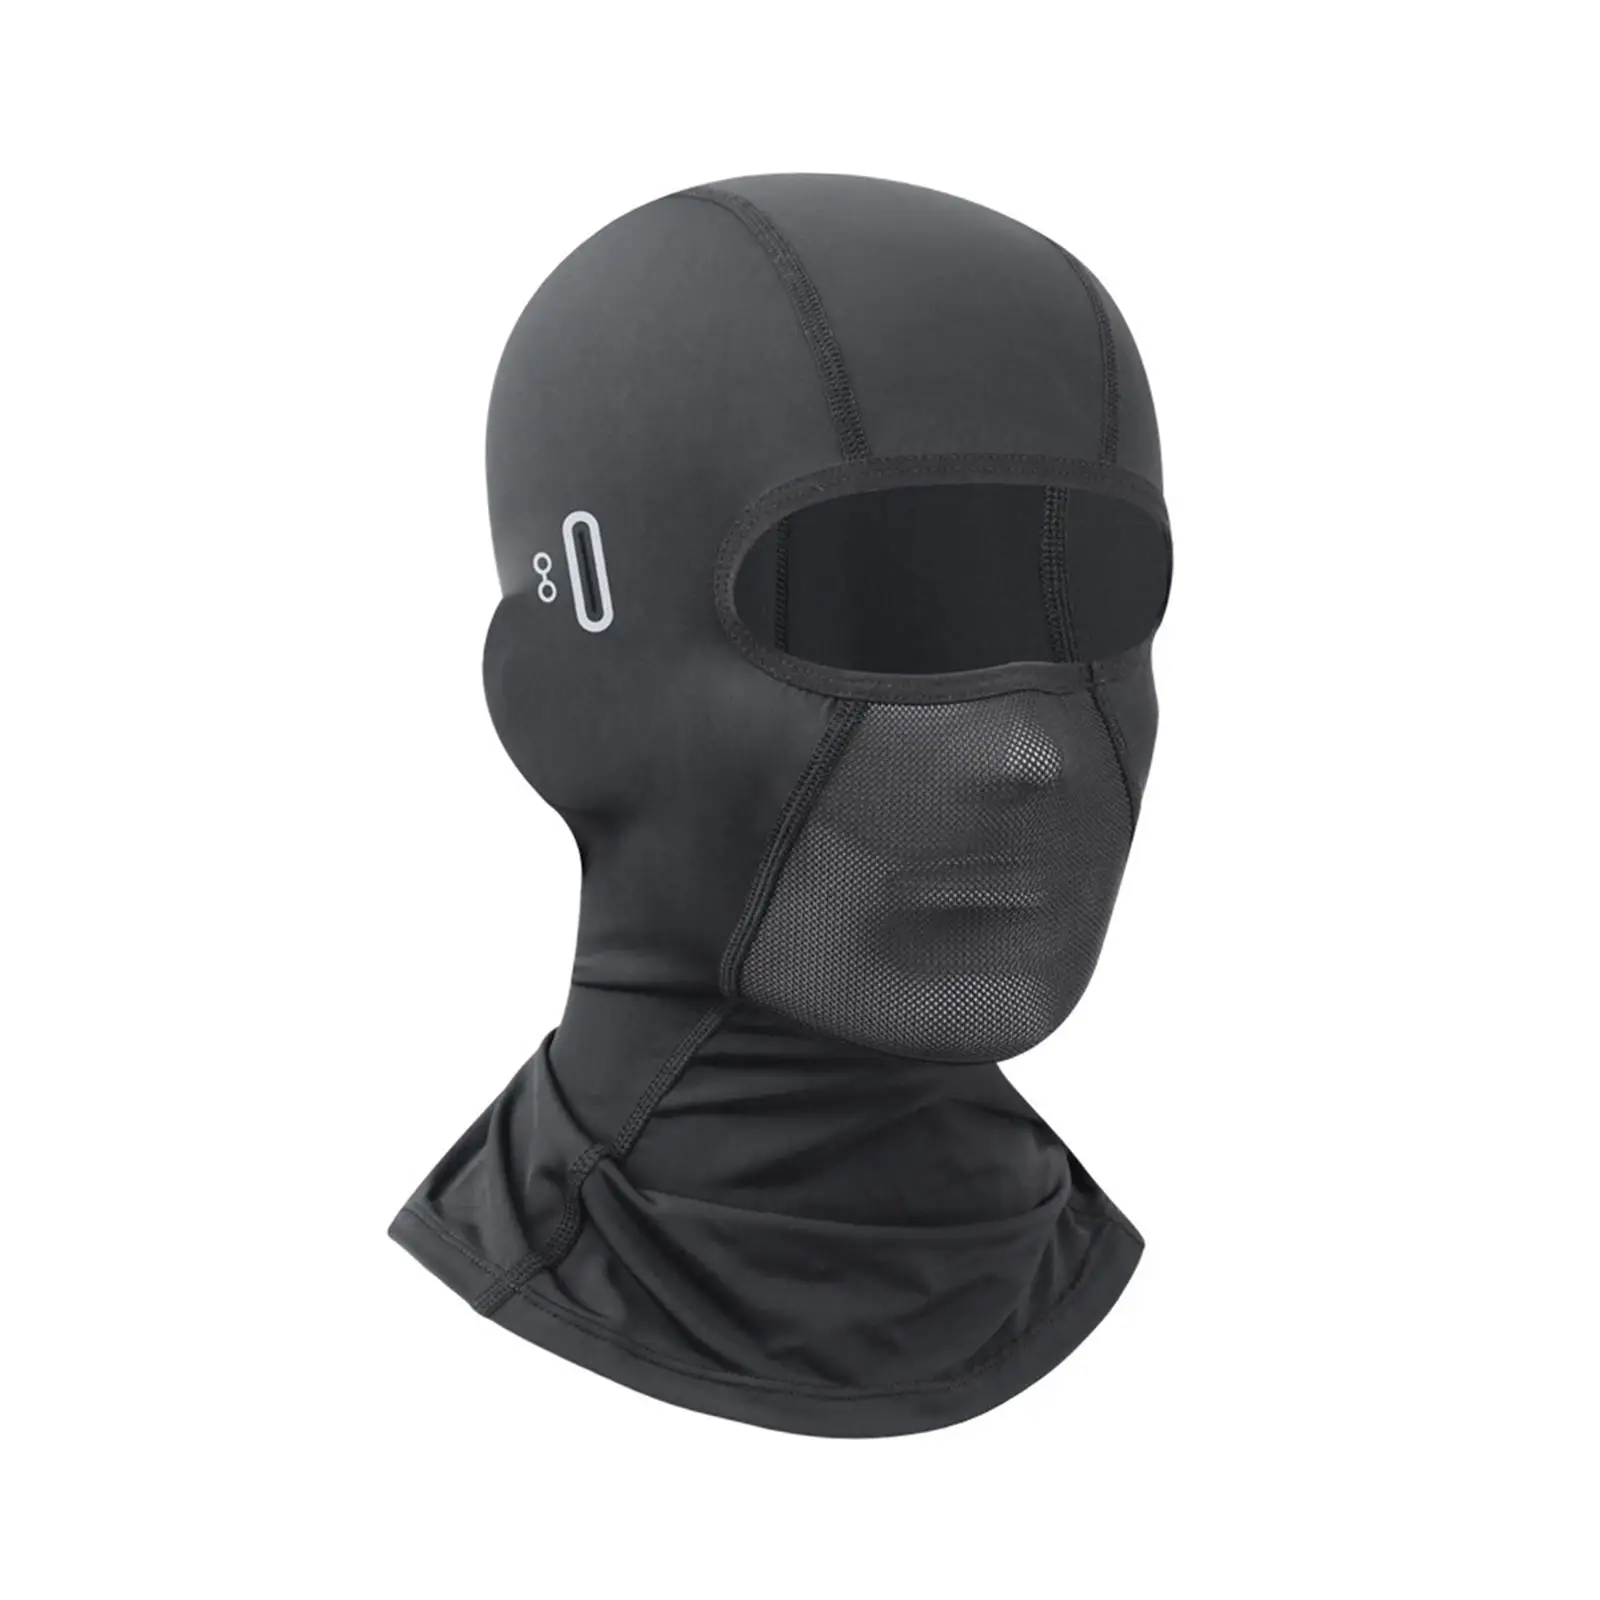 Balaclava Face Mask Summer Windproof Dustproof Full Face Mask Face Cover for Motorcycle Riding for Running Cycling Hiking Ski